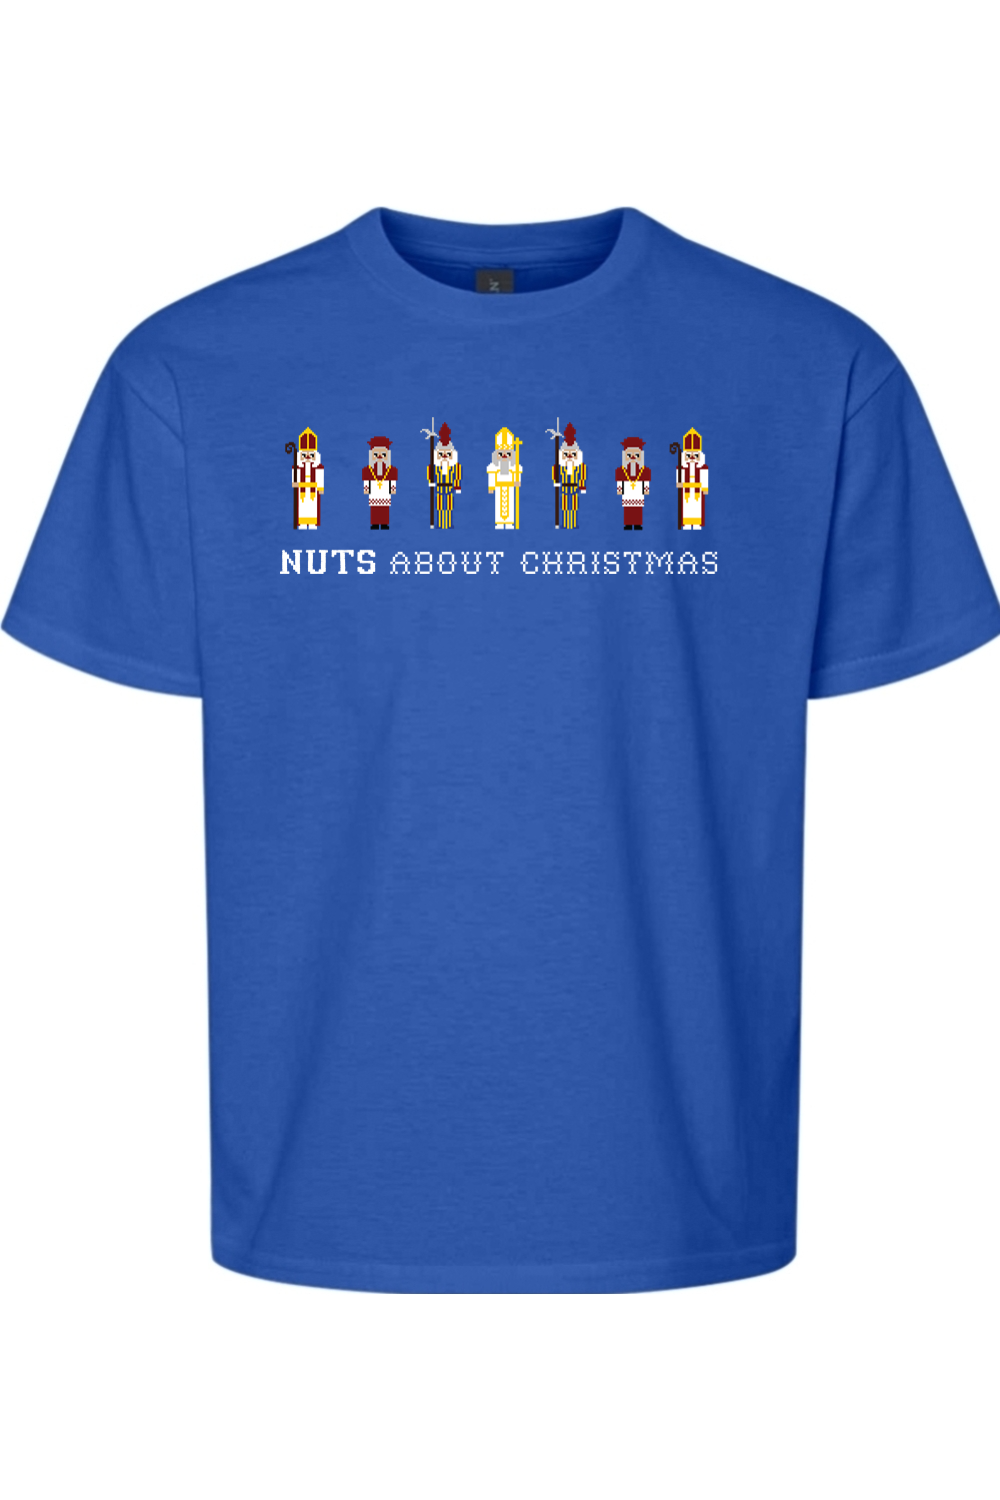 Nuts About Christmas T -Shirt - youth